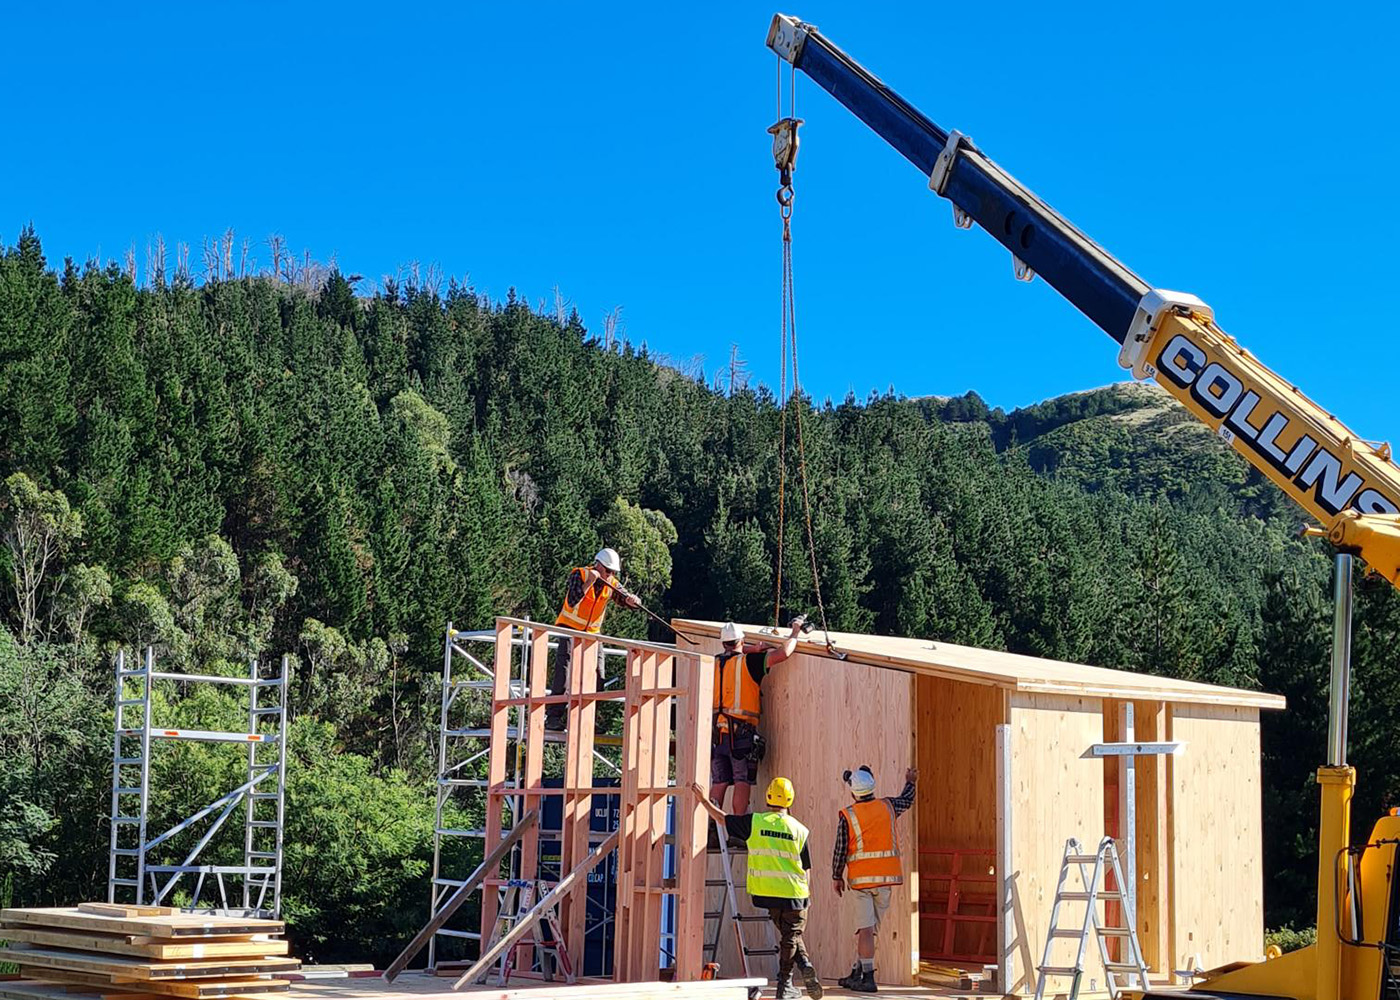 Builders guide panel being placed by crane for modular Te Whare-iti home.